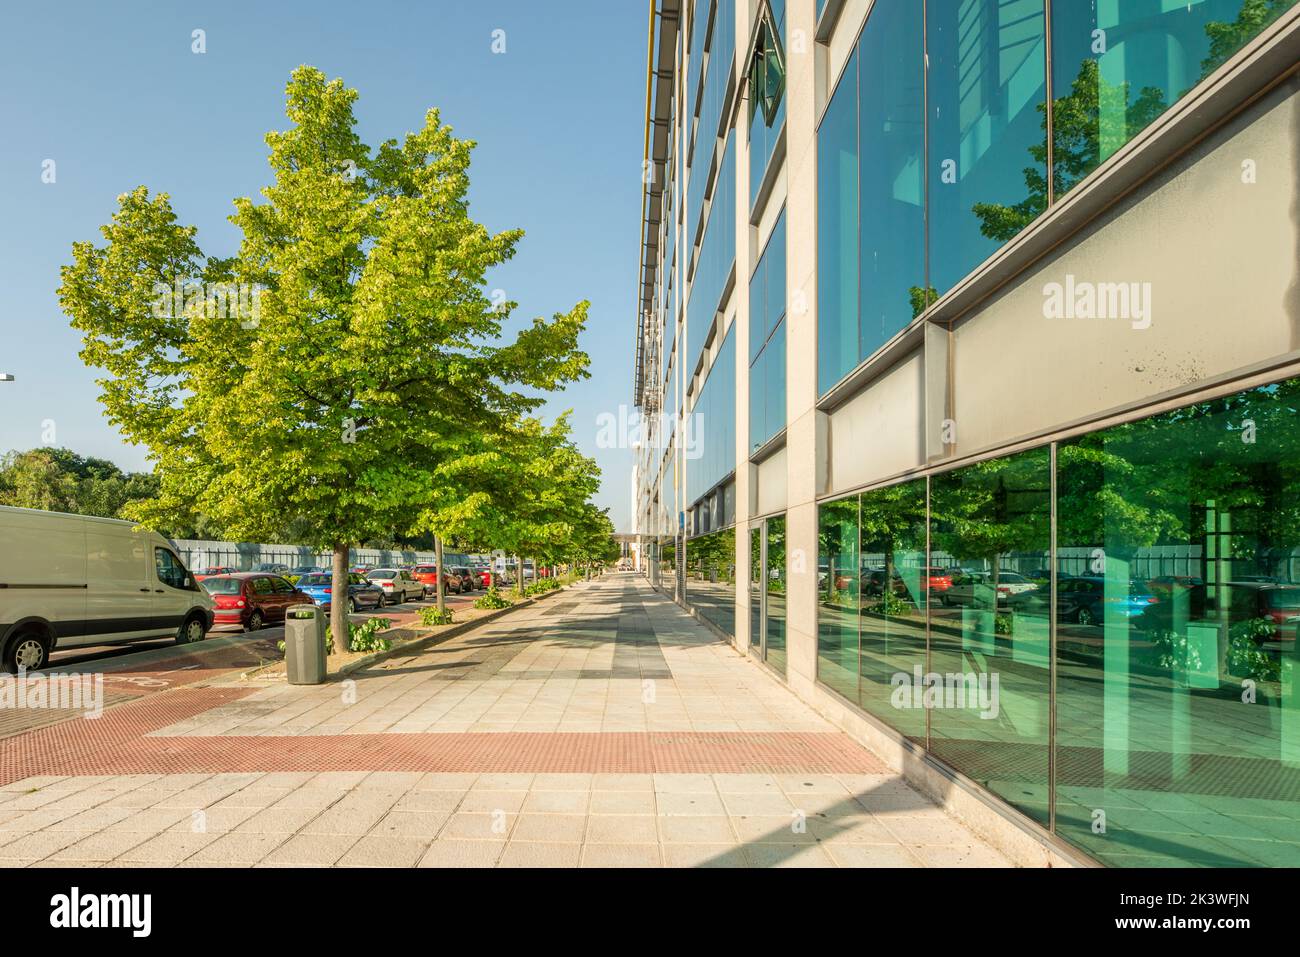 Glass, granite and metal facades in a street with young and leafy trees Stock Photo